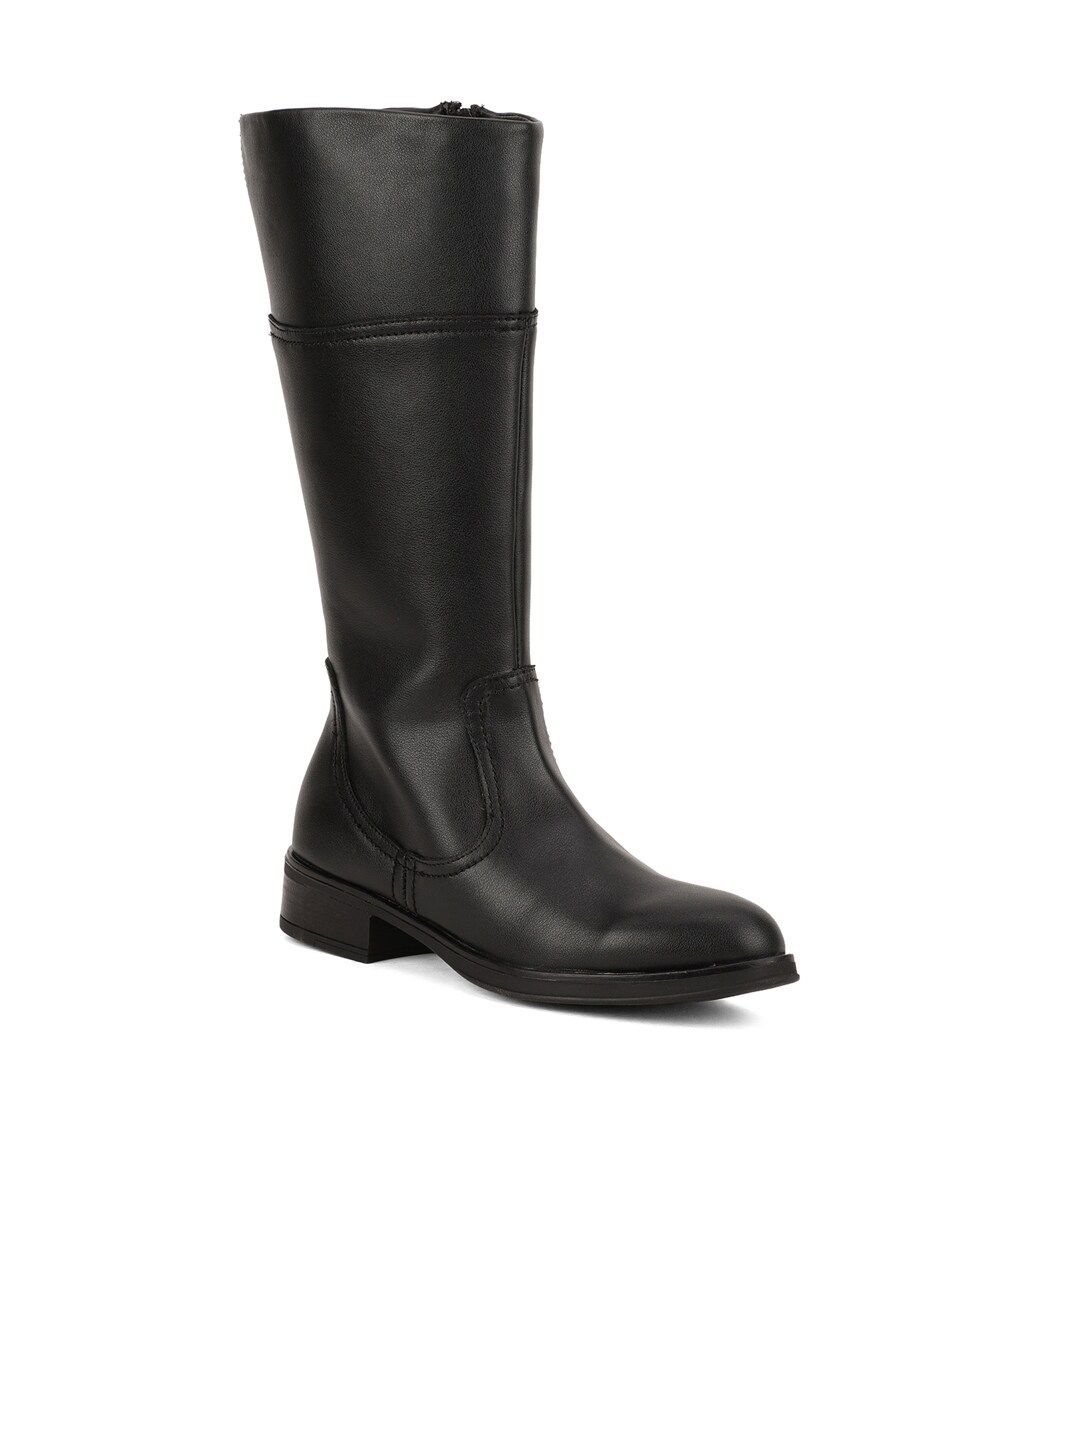 Bruno Manetti Women Black Leather Flat Boots Price in India